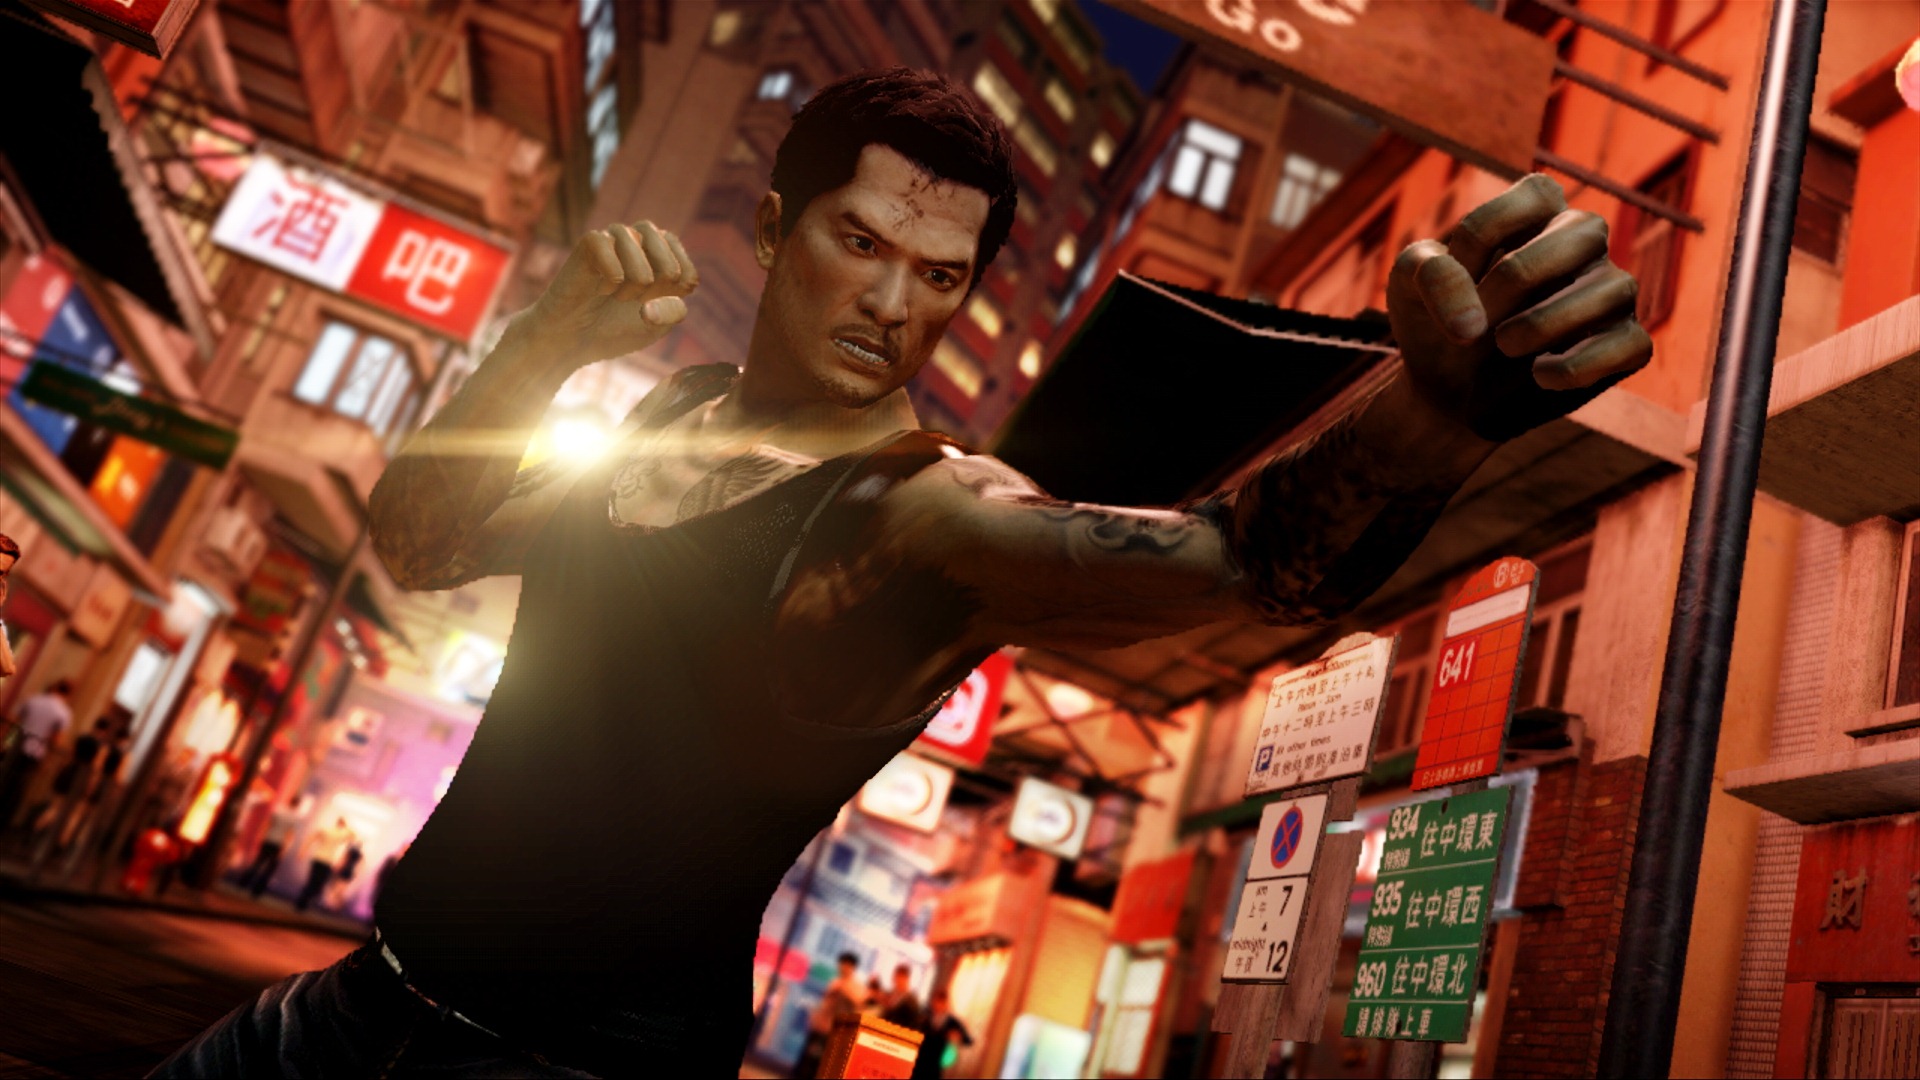 Sleeping Dogs: Definitive Edition Reviews - OpenCritic